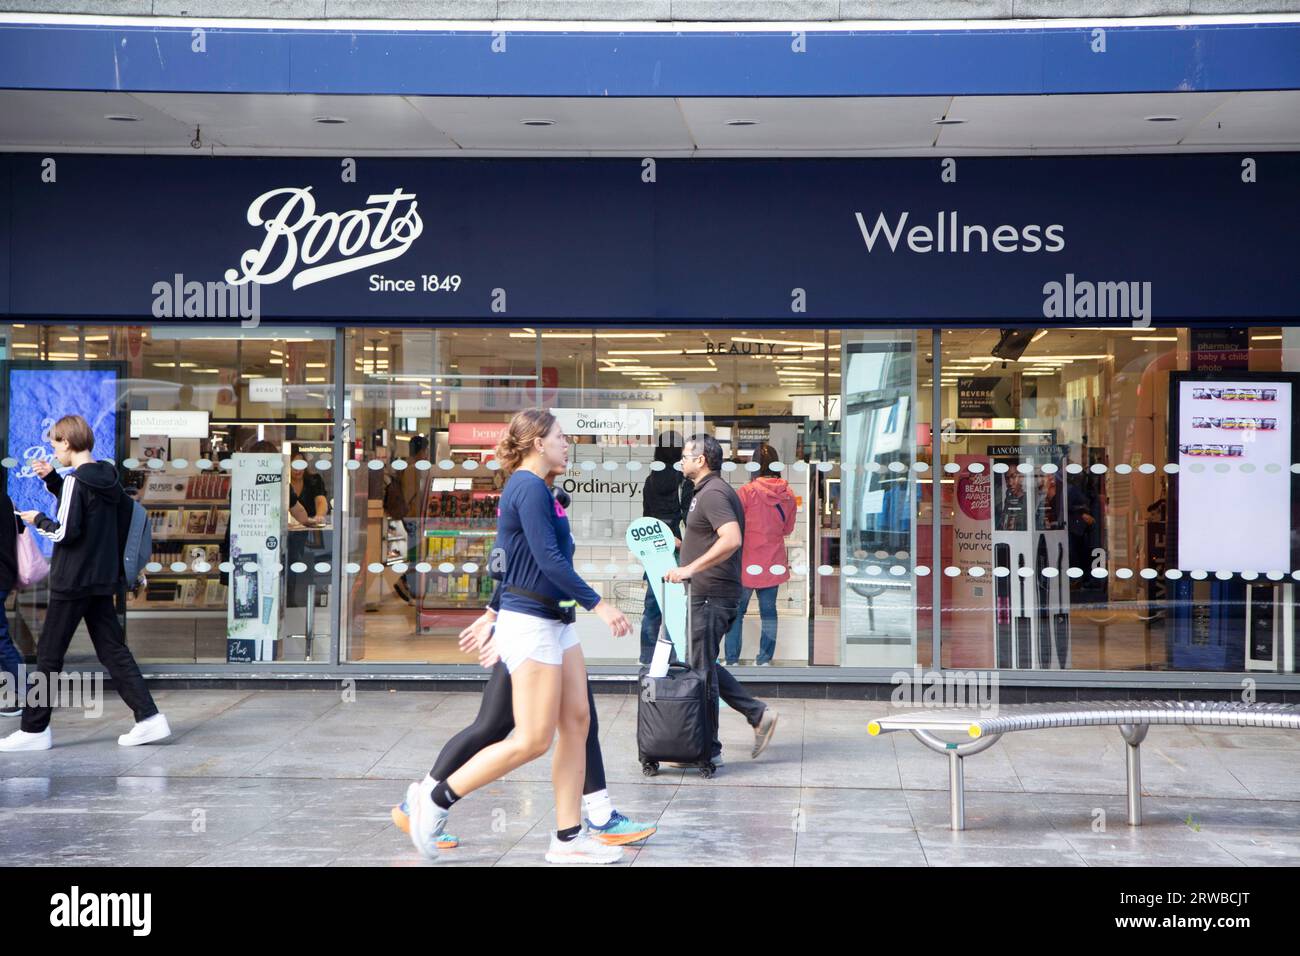 Boots chemist in high street in Exeter city centre Stock Photo